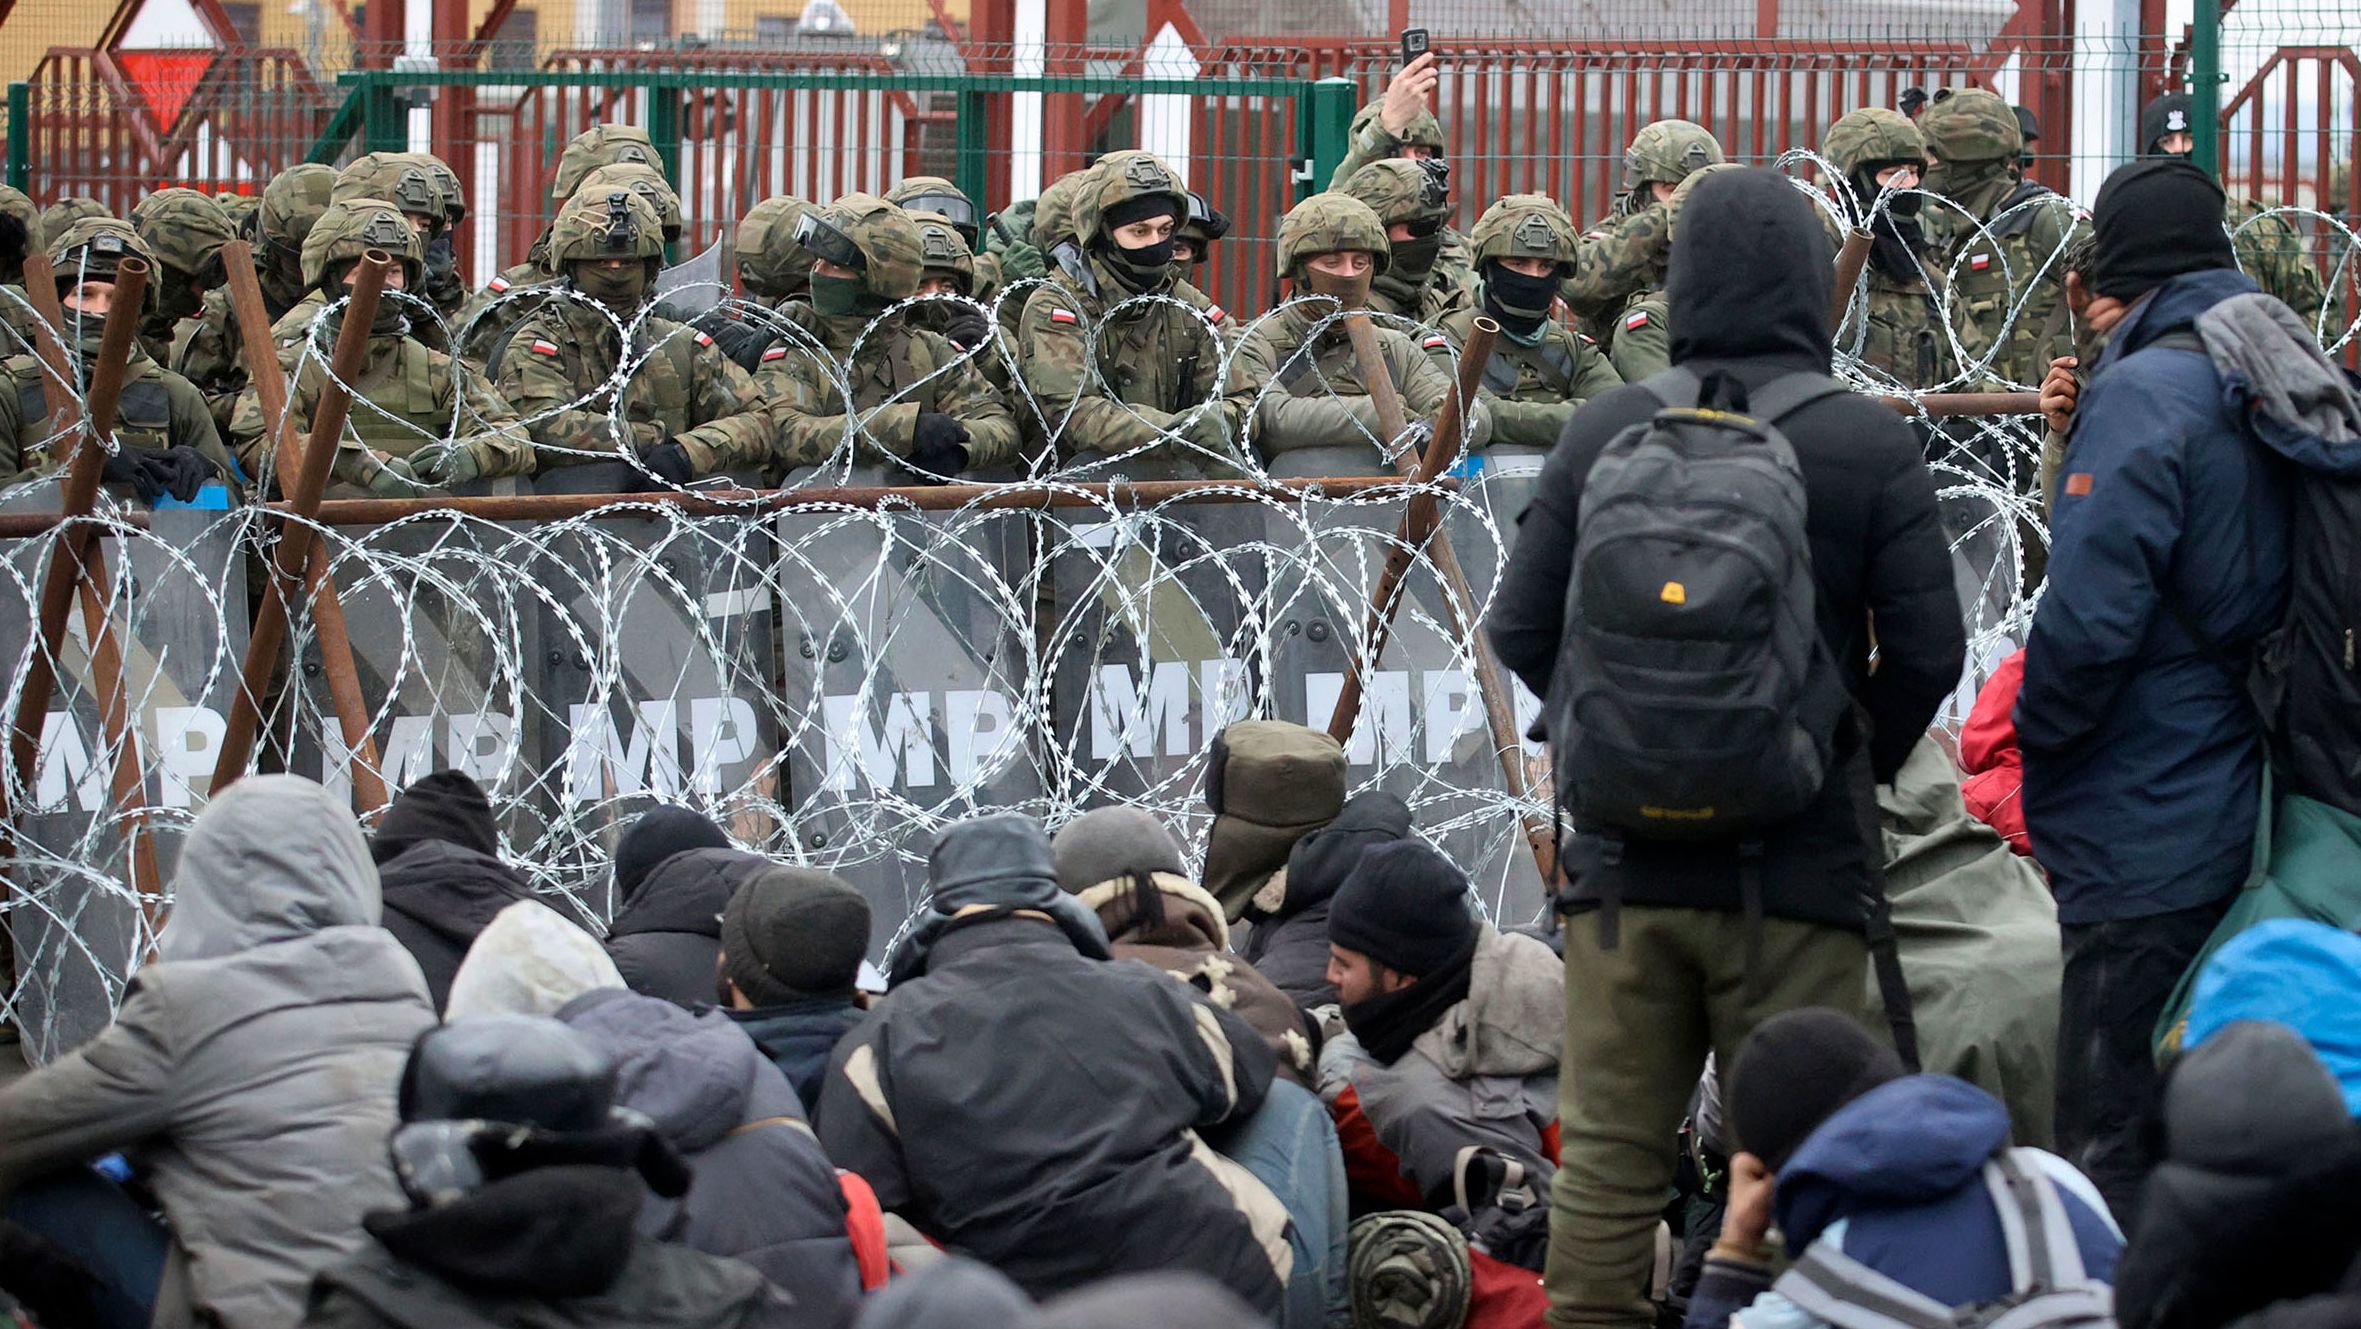 Migrants sit in front of Polish troops at the border crossing on Monday, November 15.